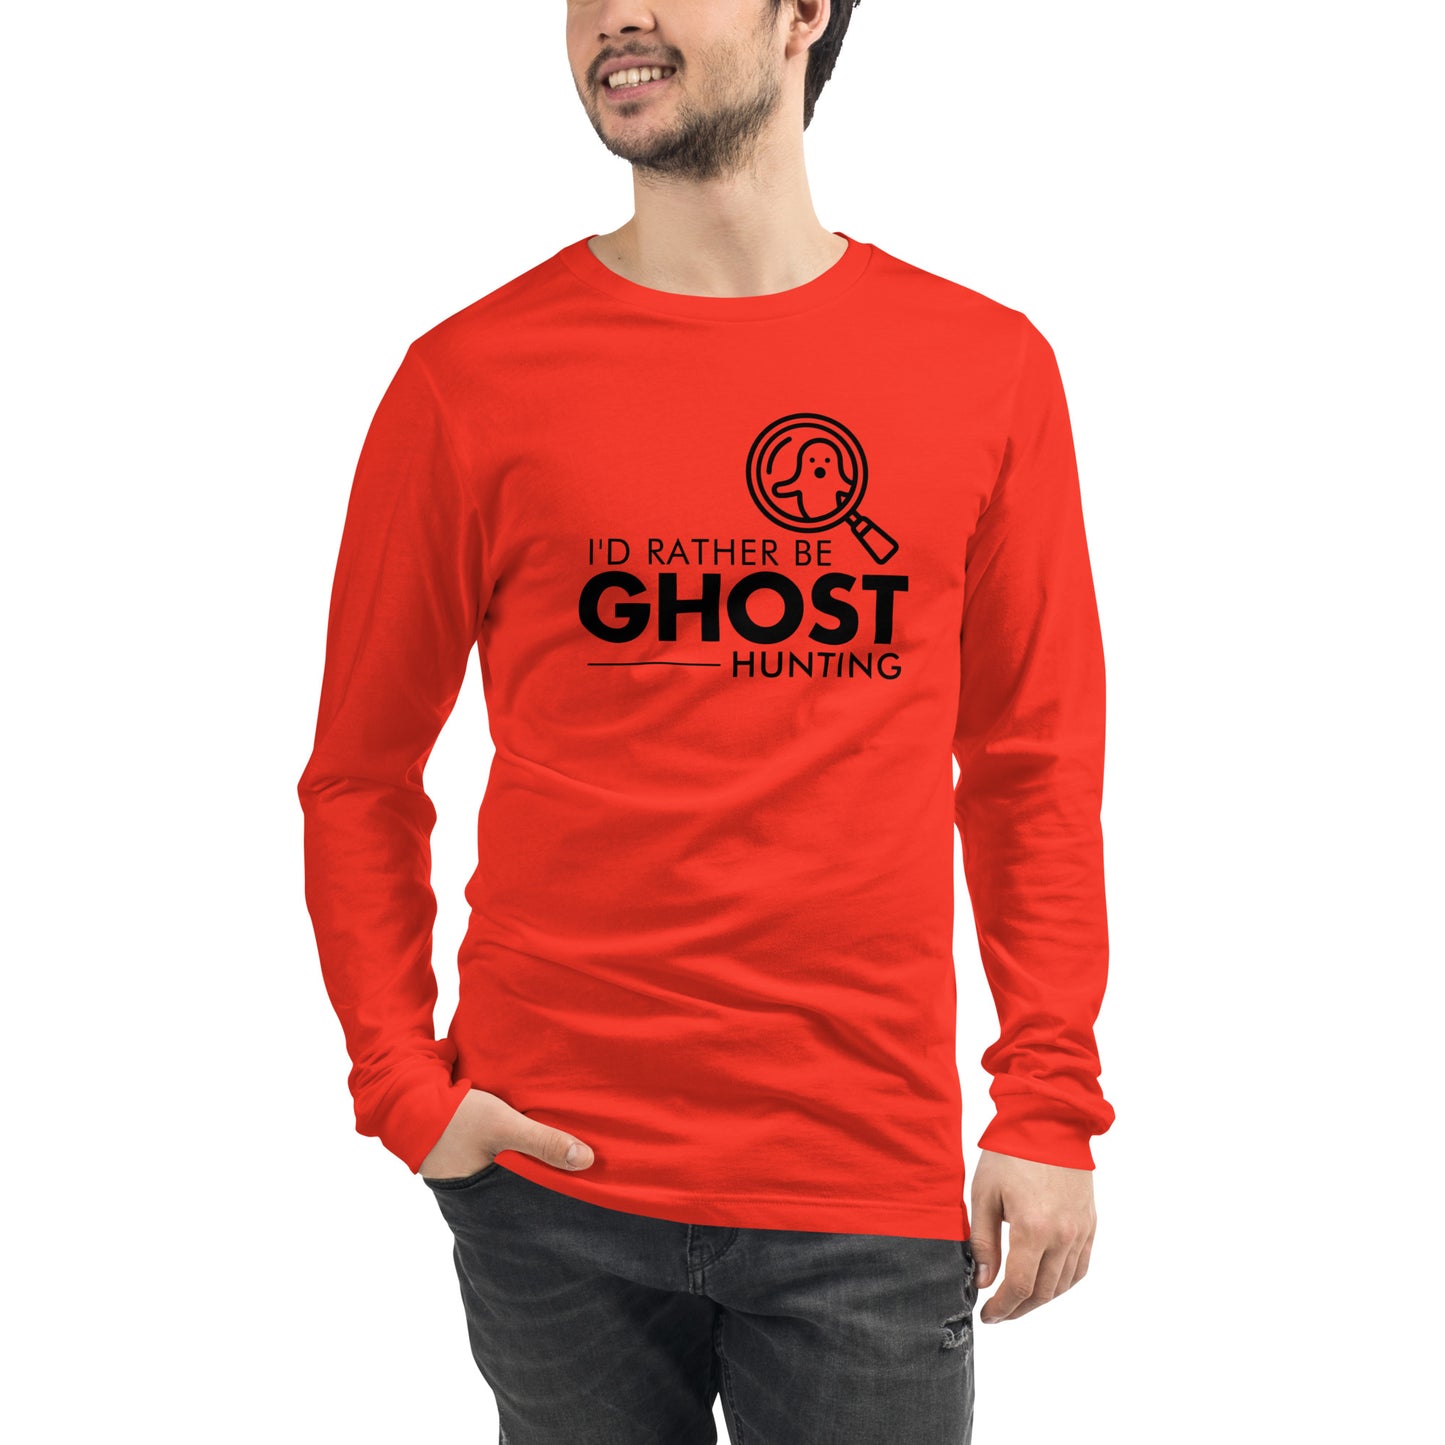 "I'd Rather Be Ghost Hunting" / Unisex Long Sleeve Tee